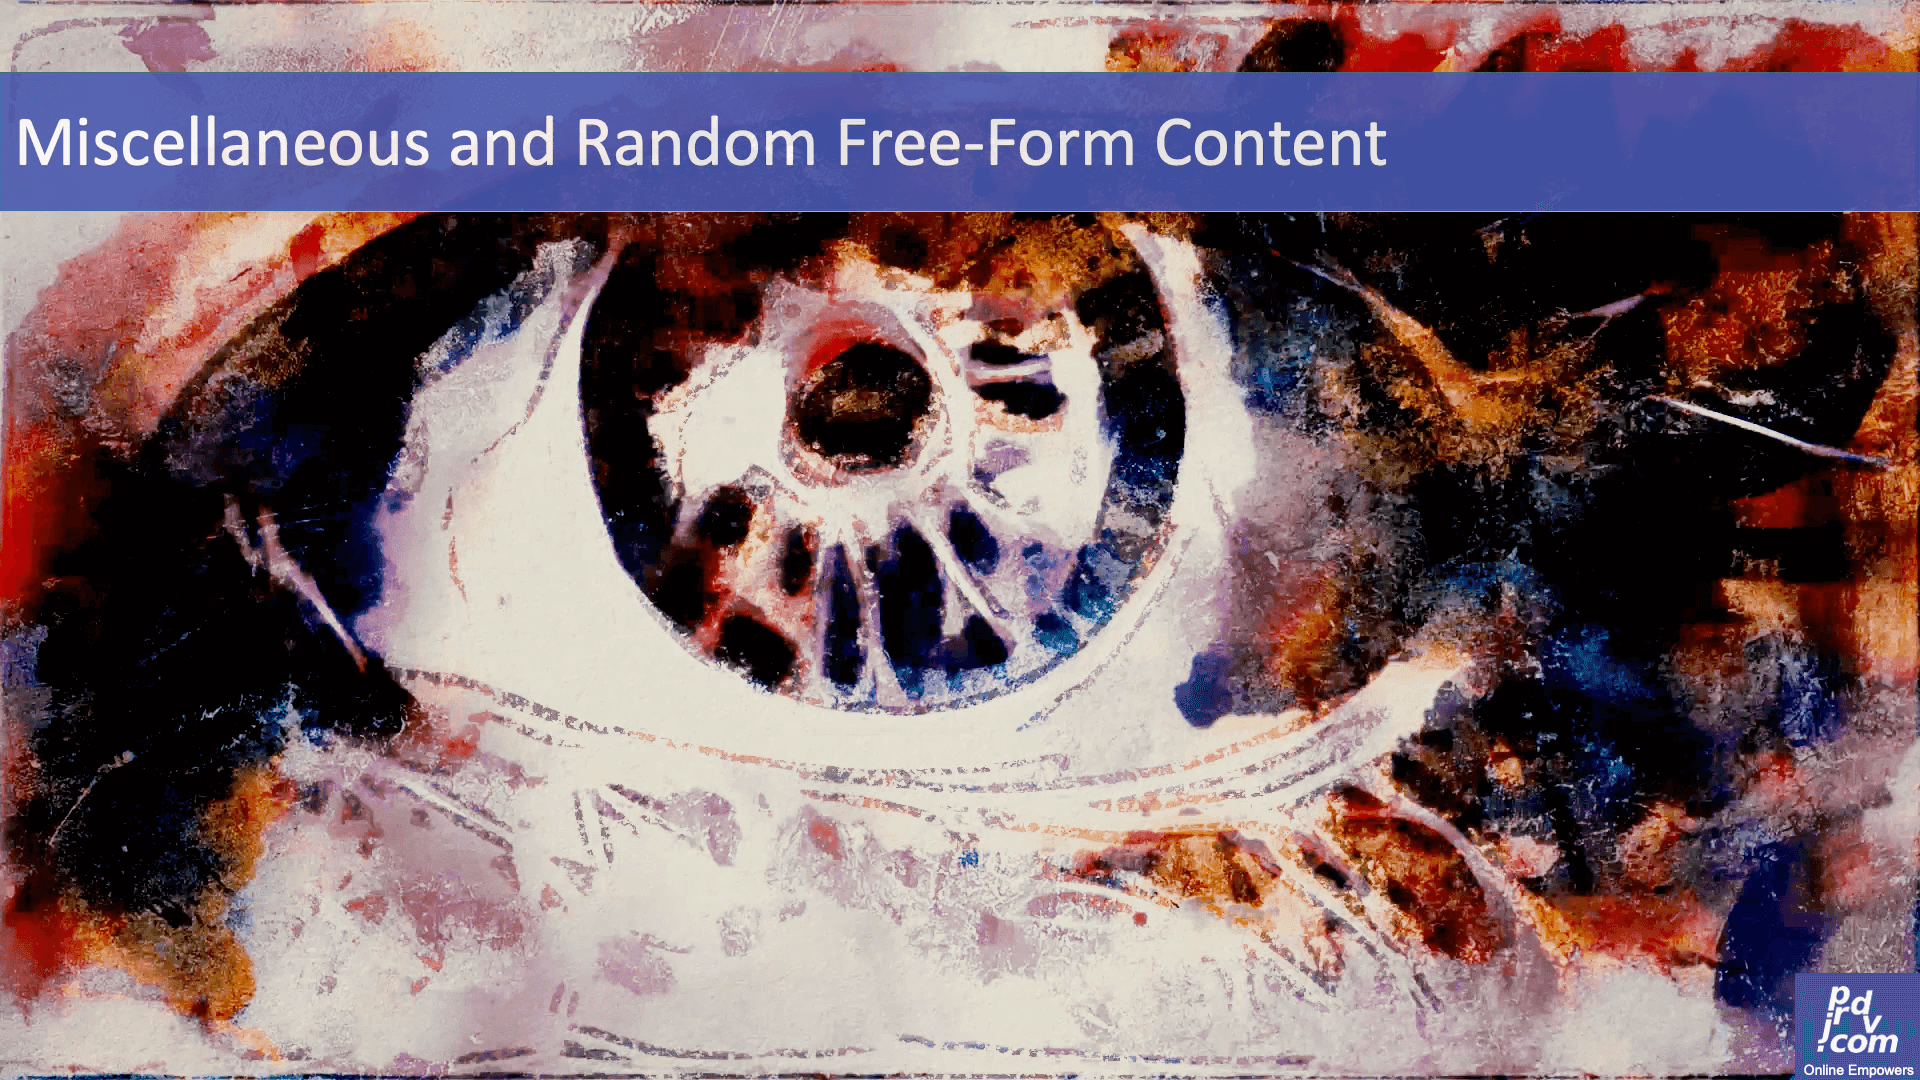 Miscellaneous and Random Free-Form Content